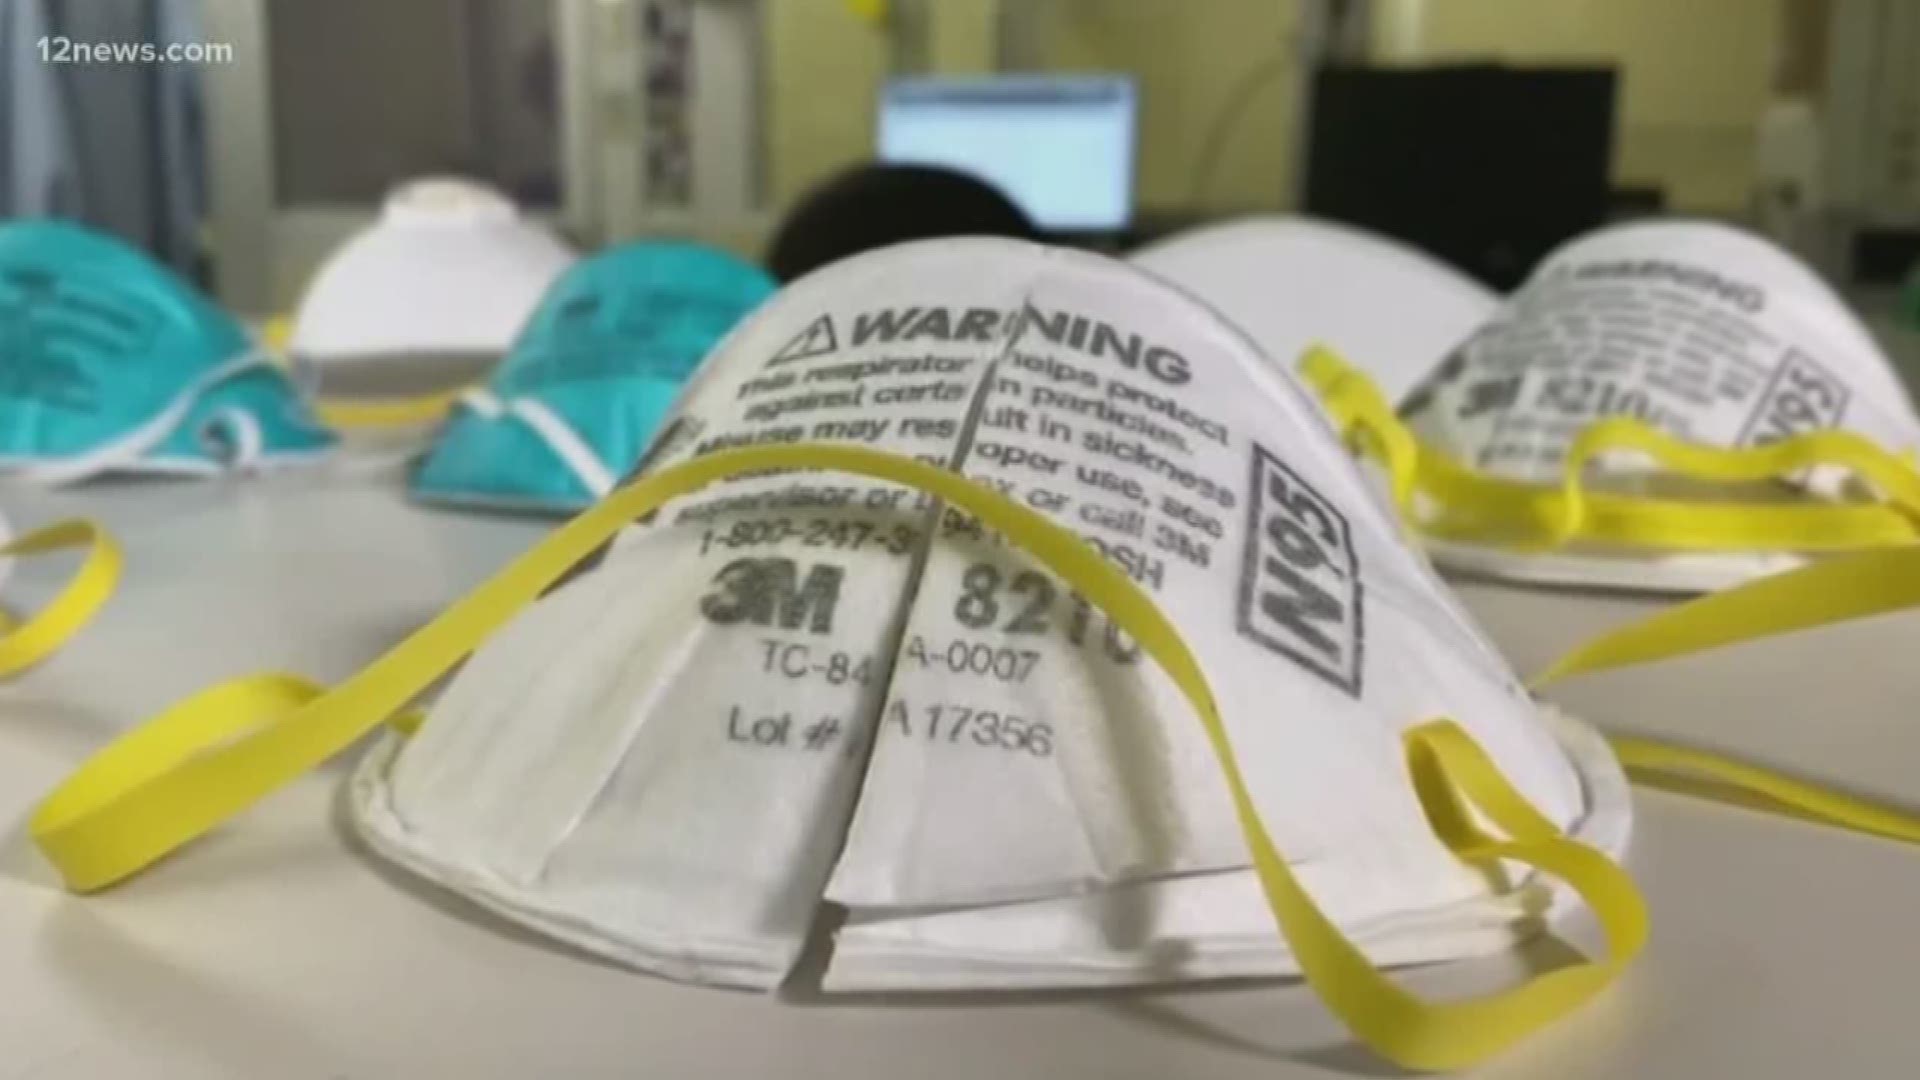 Dr. Scott Sher went to Facebook to ask for N-95 masks. He says Valley hospitals are still short and are running out of the desperately needed gear.